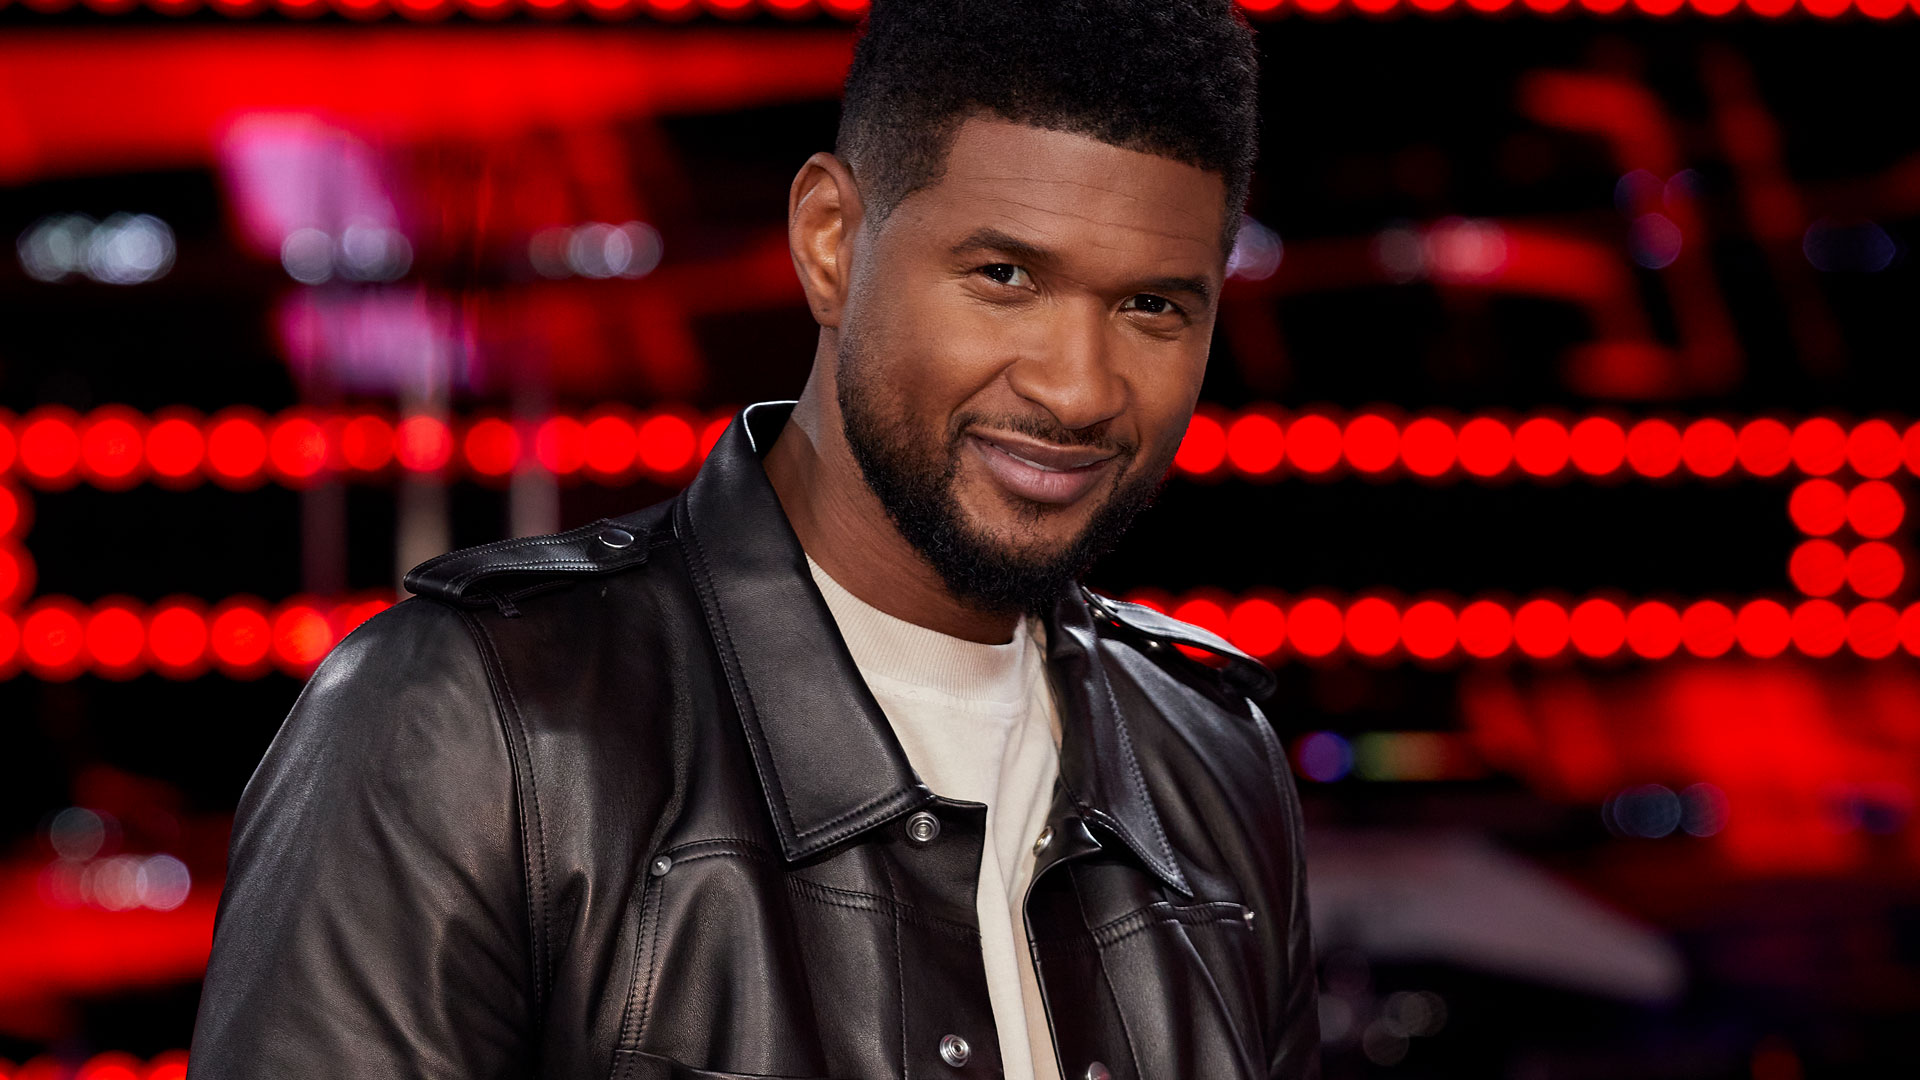 Watch The Voice Web Exclusive Mega Mentor Usher Has Quite a Way with